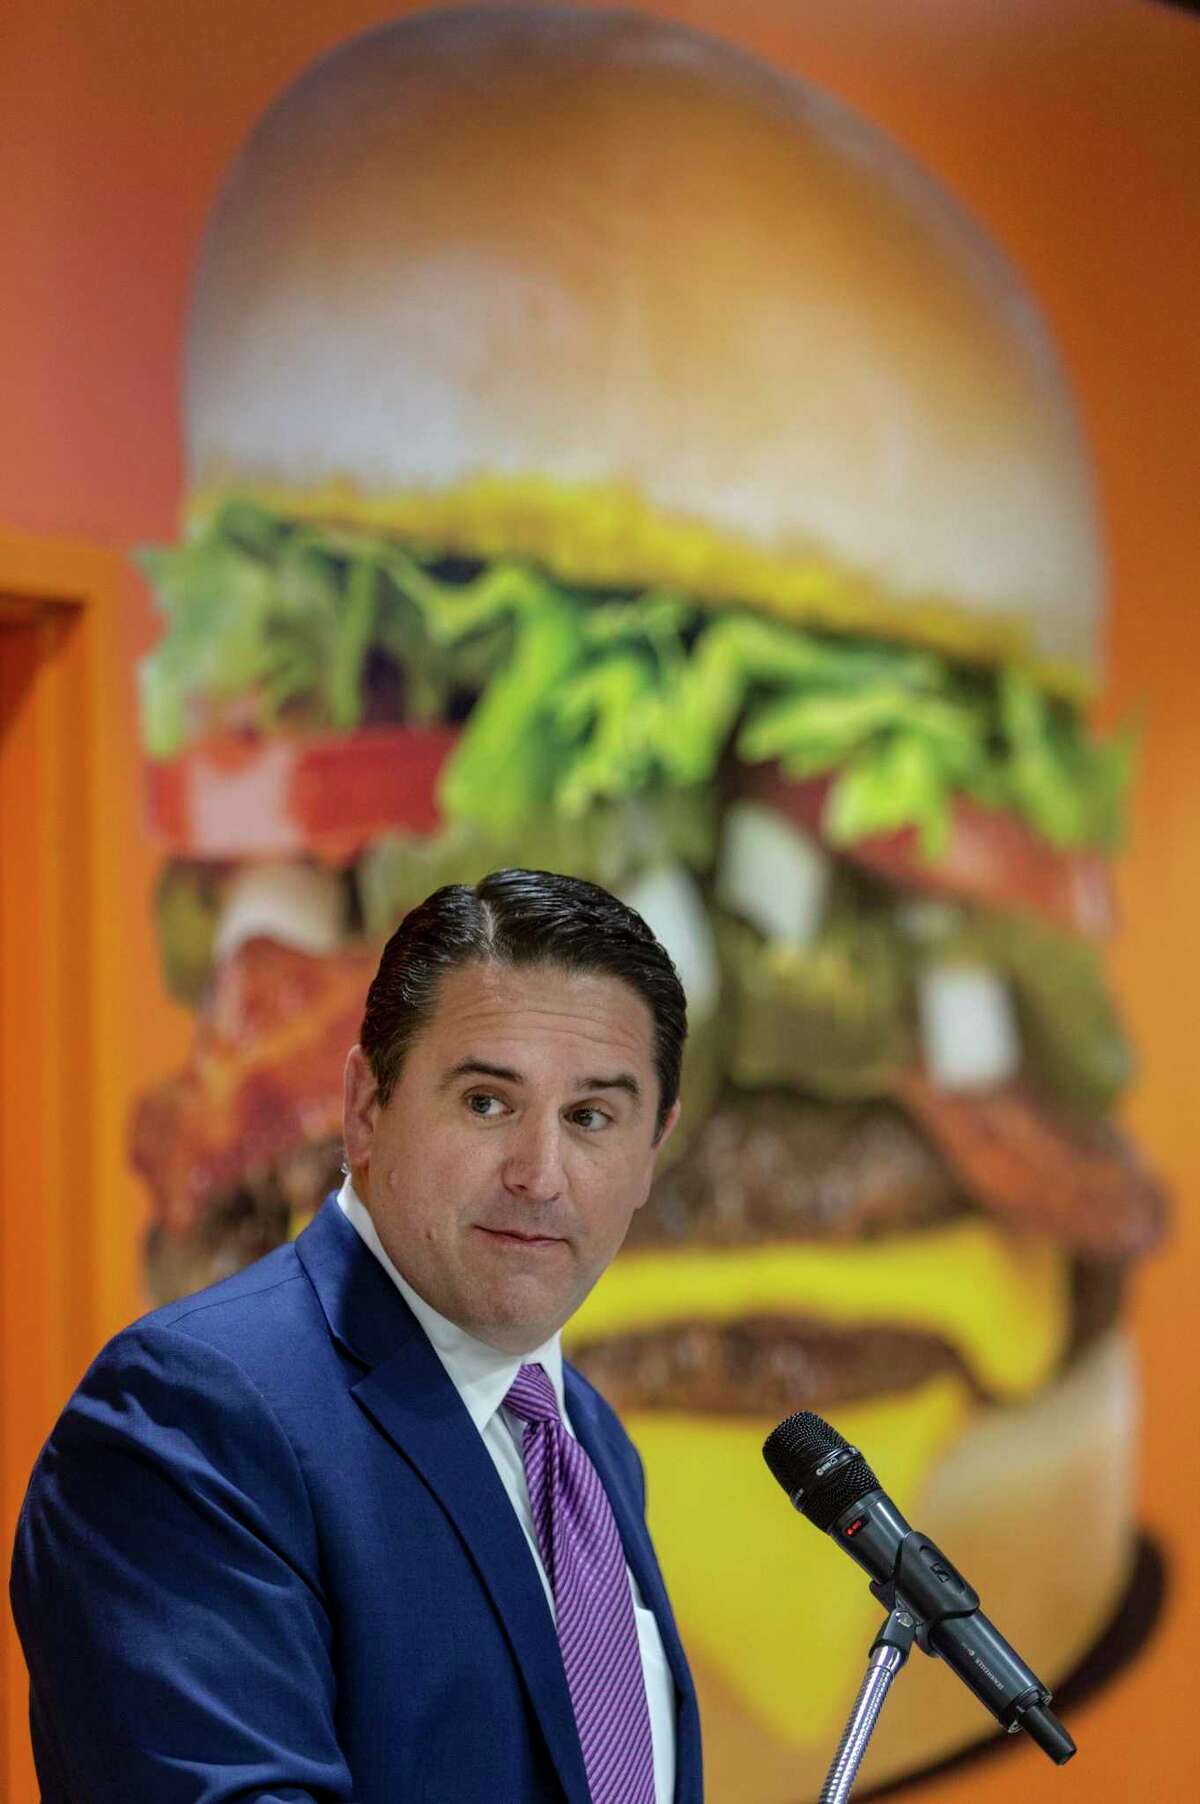 San Antonio city manager Erik Walsh speaks Tuesday morning, Aug. 24, 2021 at the San Antonio Airport during a news conference to announce Whataburger will be opening a store in Terminal B. Whataburger enters the airport after the 2019 controversy surrounding the City of San Antonio's handling of a contract for a Chick-fil-A restaurant at the same location.